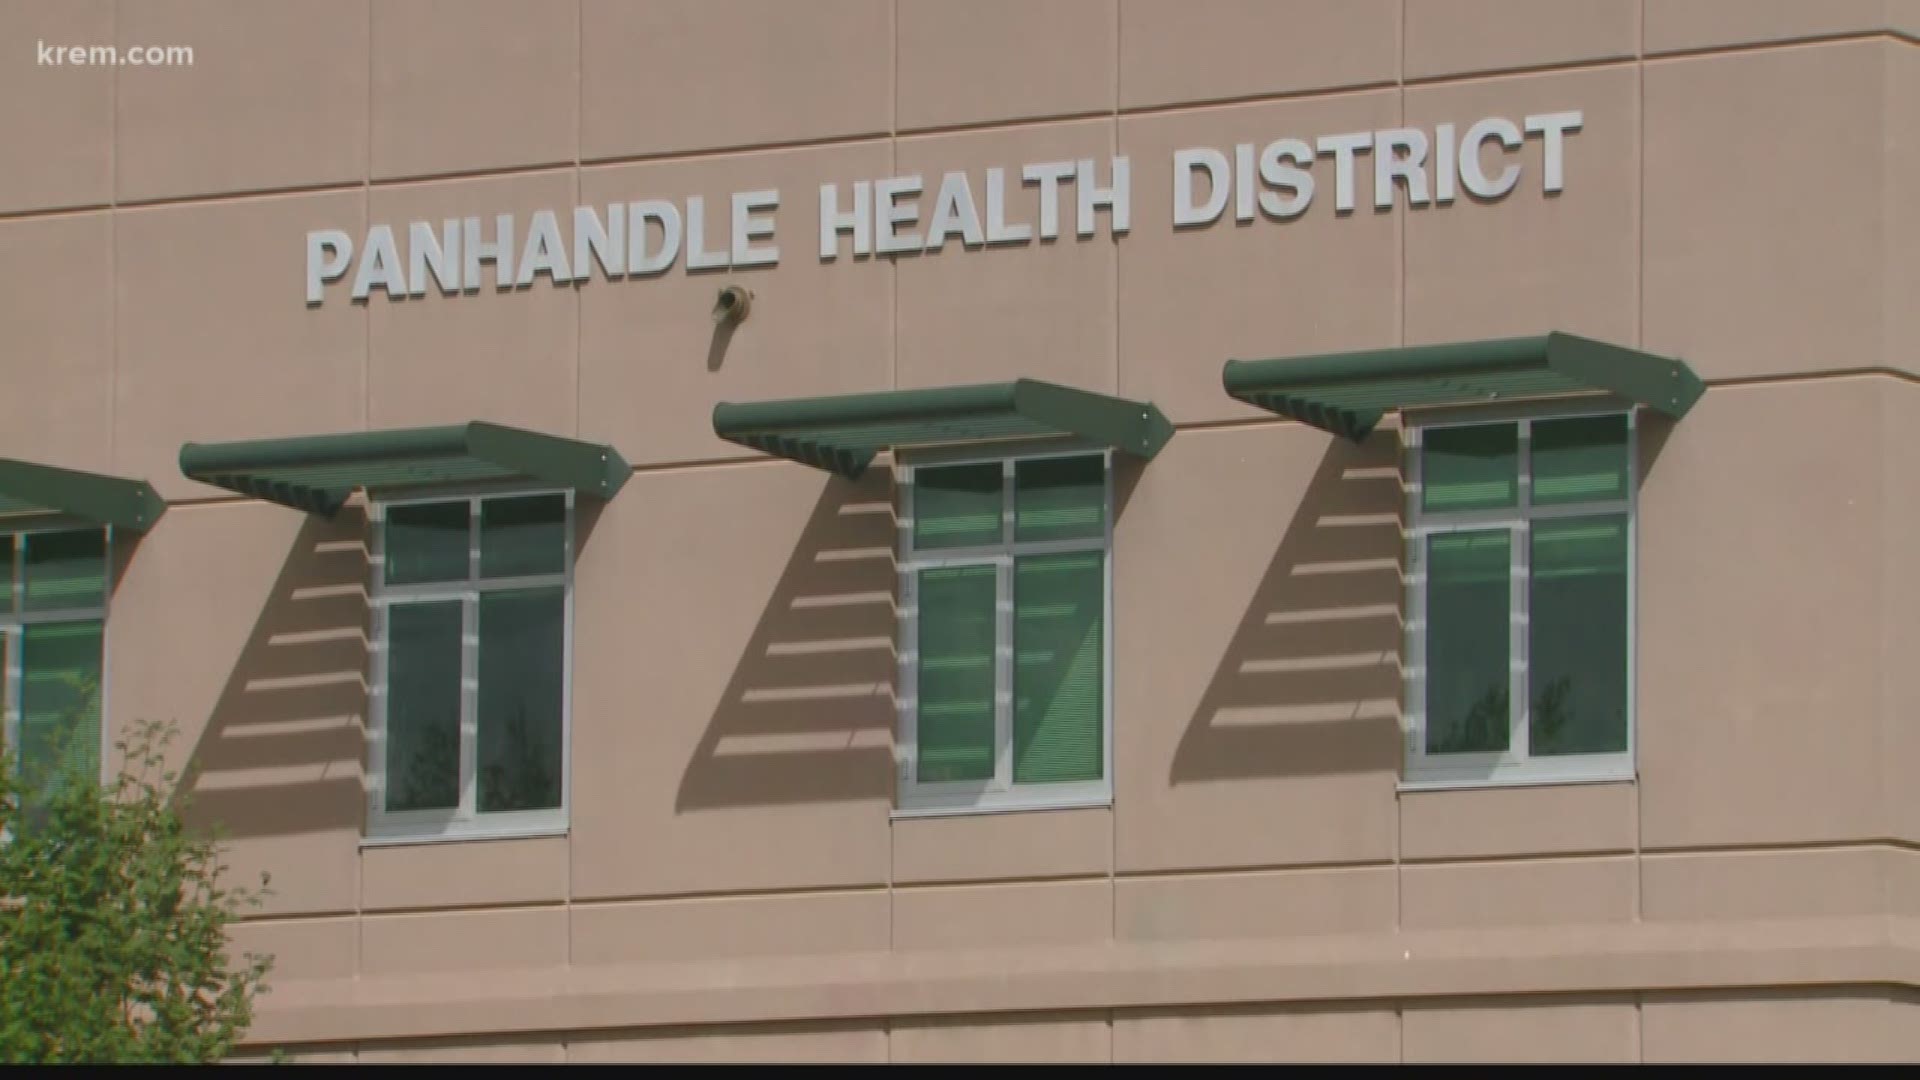 The Idaho Department of Health and Wellness said two cases have been confirmed and that they are investigating additional suspected cases.